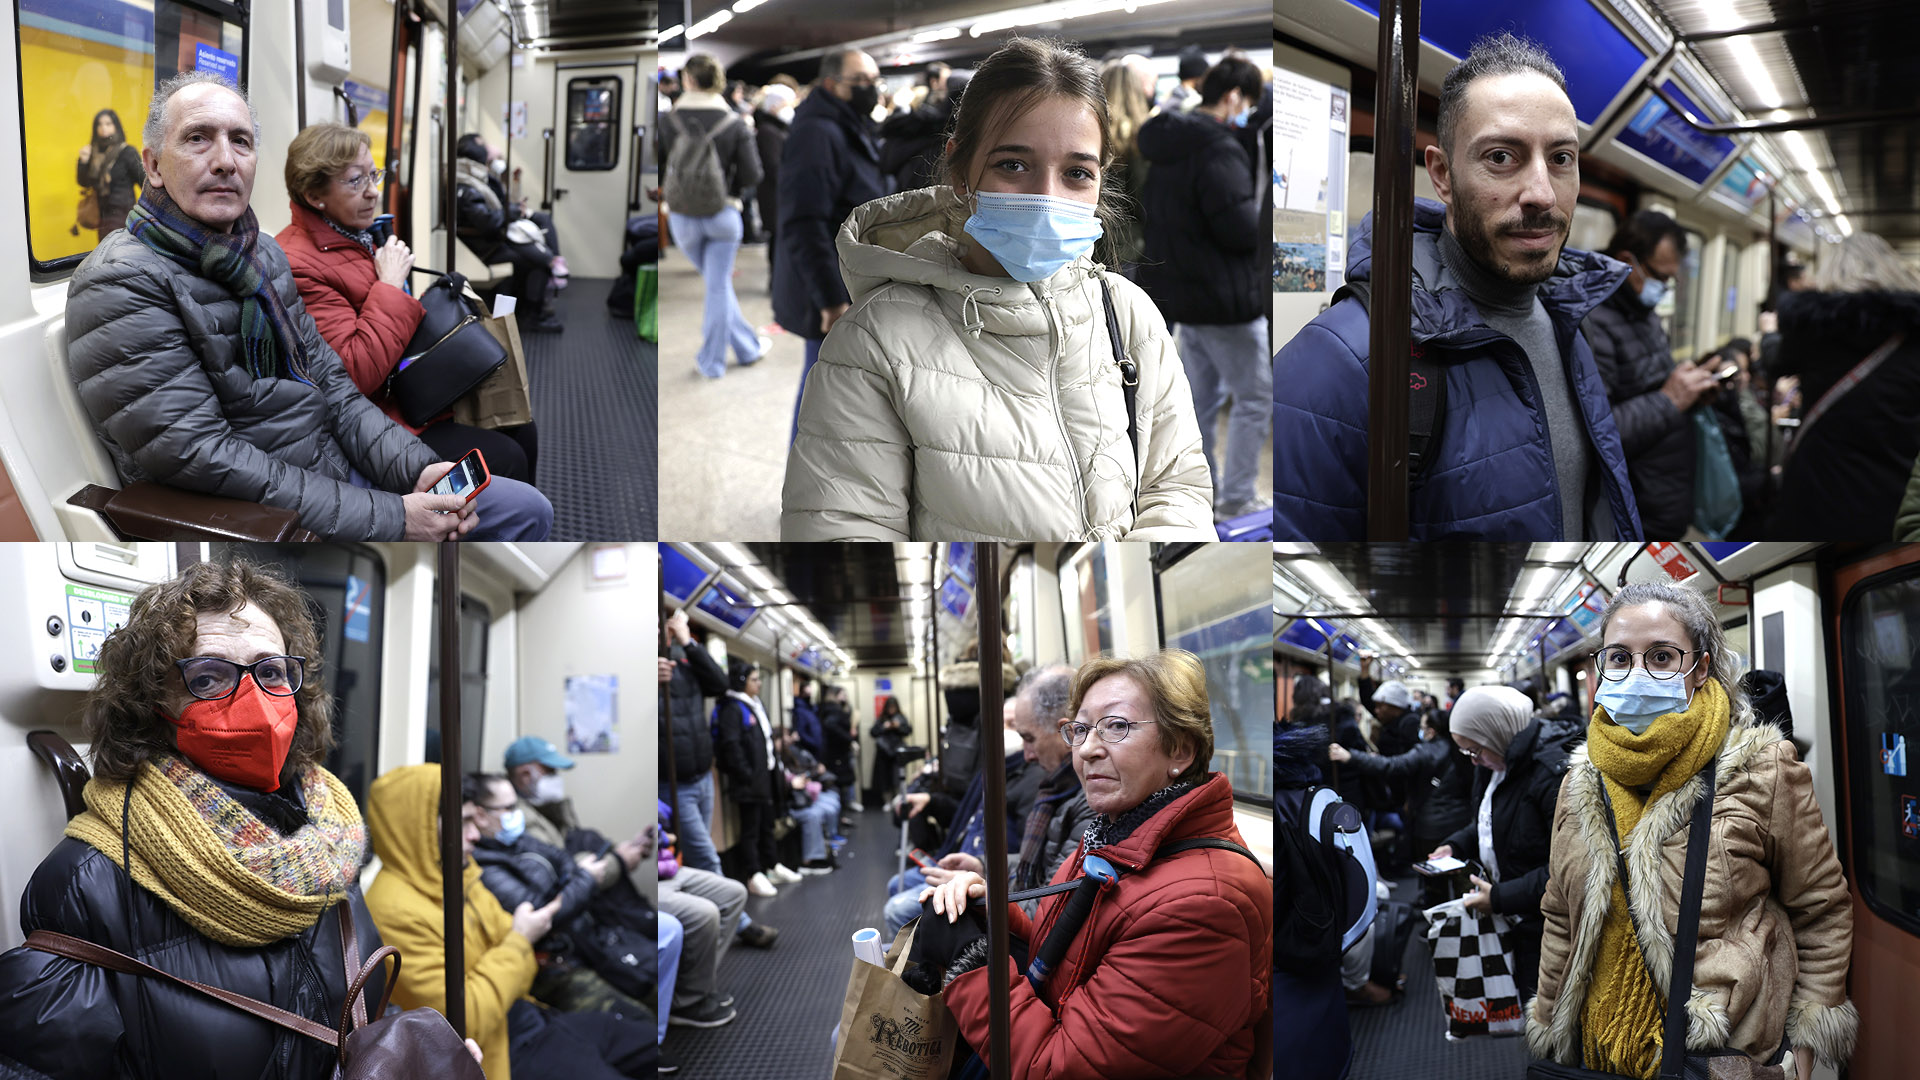 20minutos travels through different means of transport to check the use of masks on the first day without obligation.